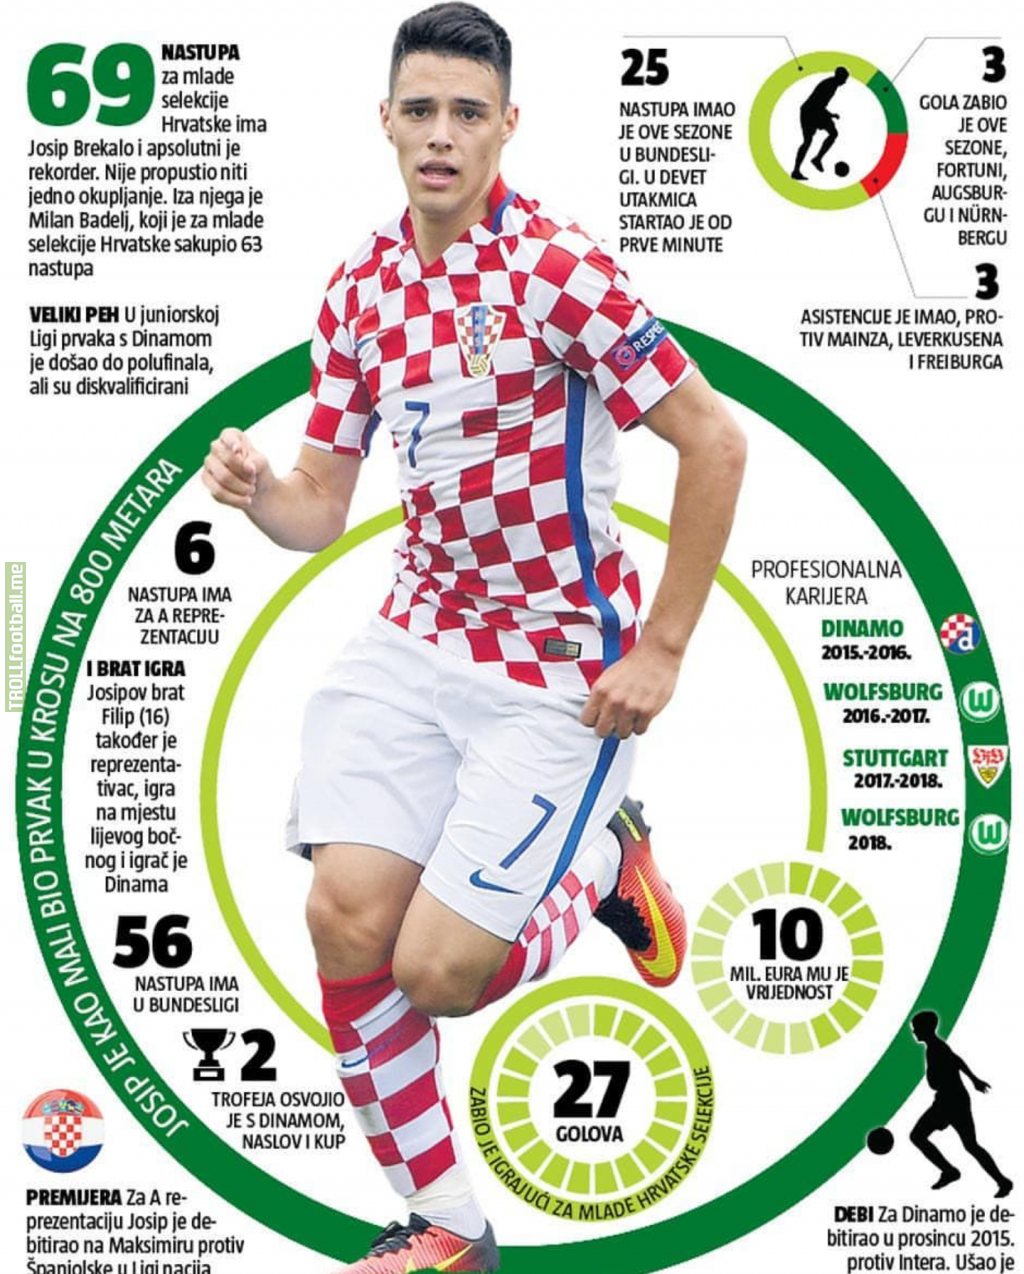 Josip Brekalo has never missed a national team call-up since making his debut in the Croatian U-14 side and he keeps extending his record for the most youth team appearances for Croatia which currently stands at 69 games